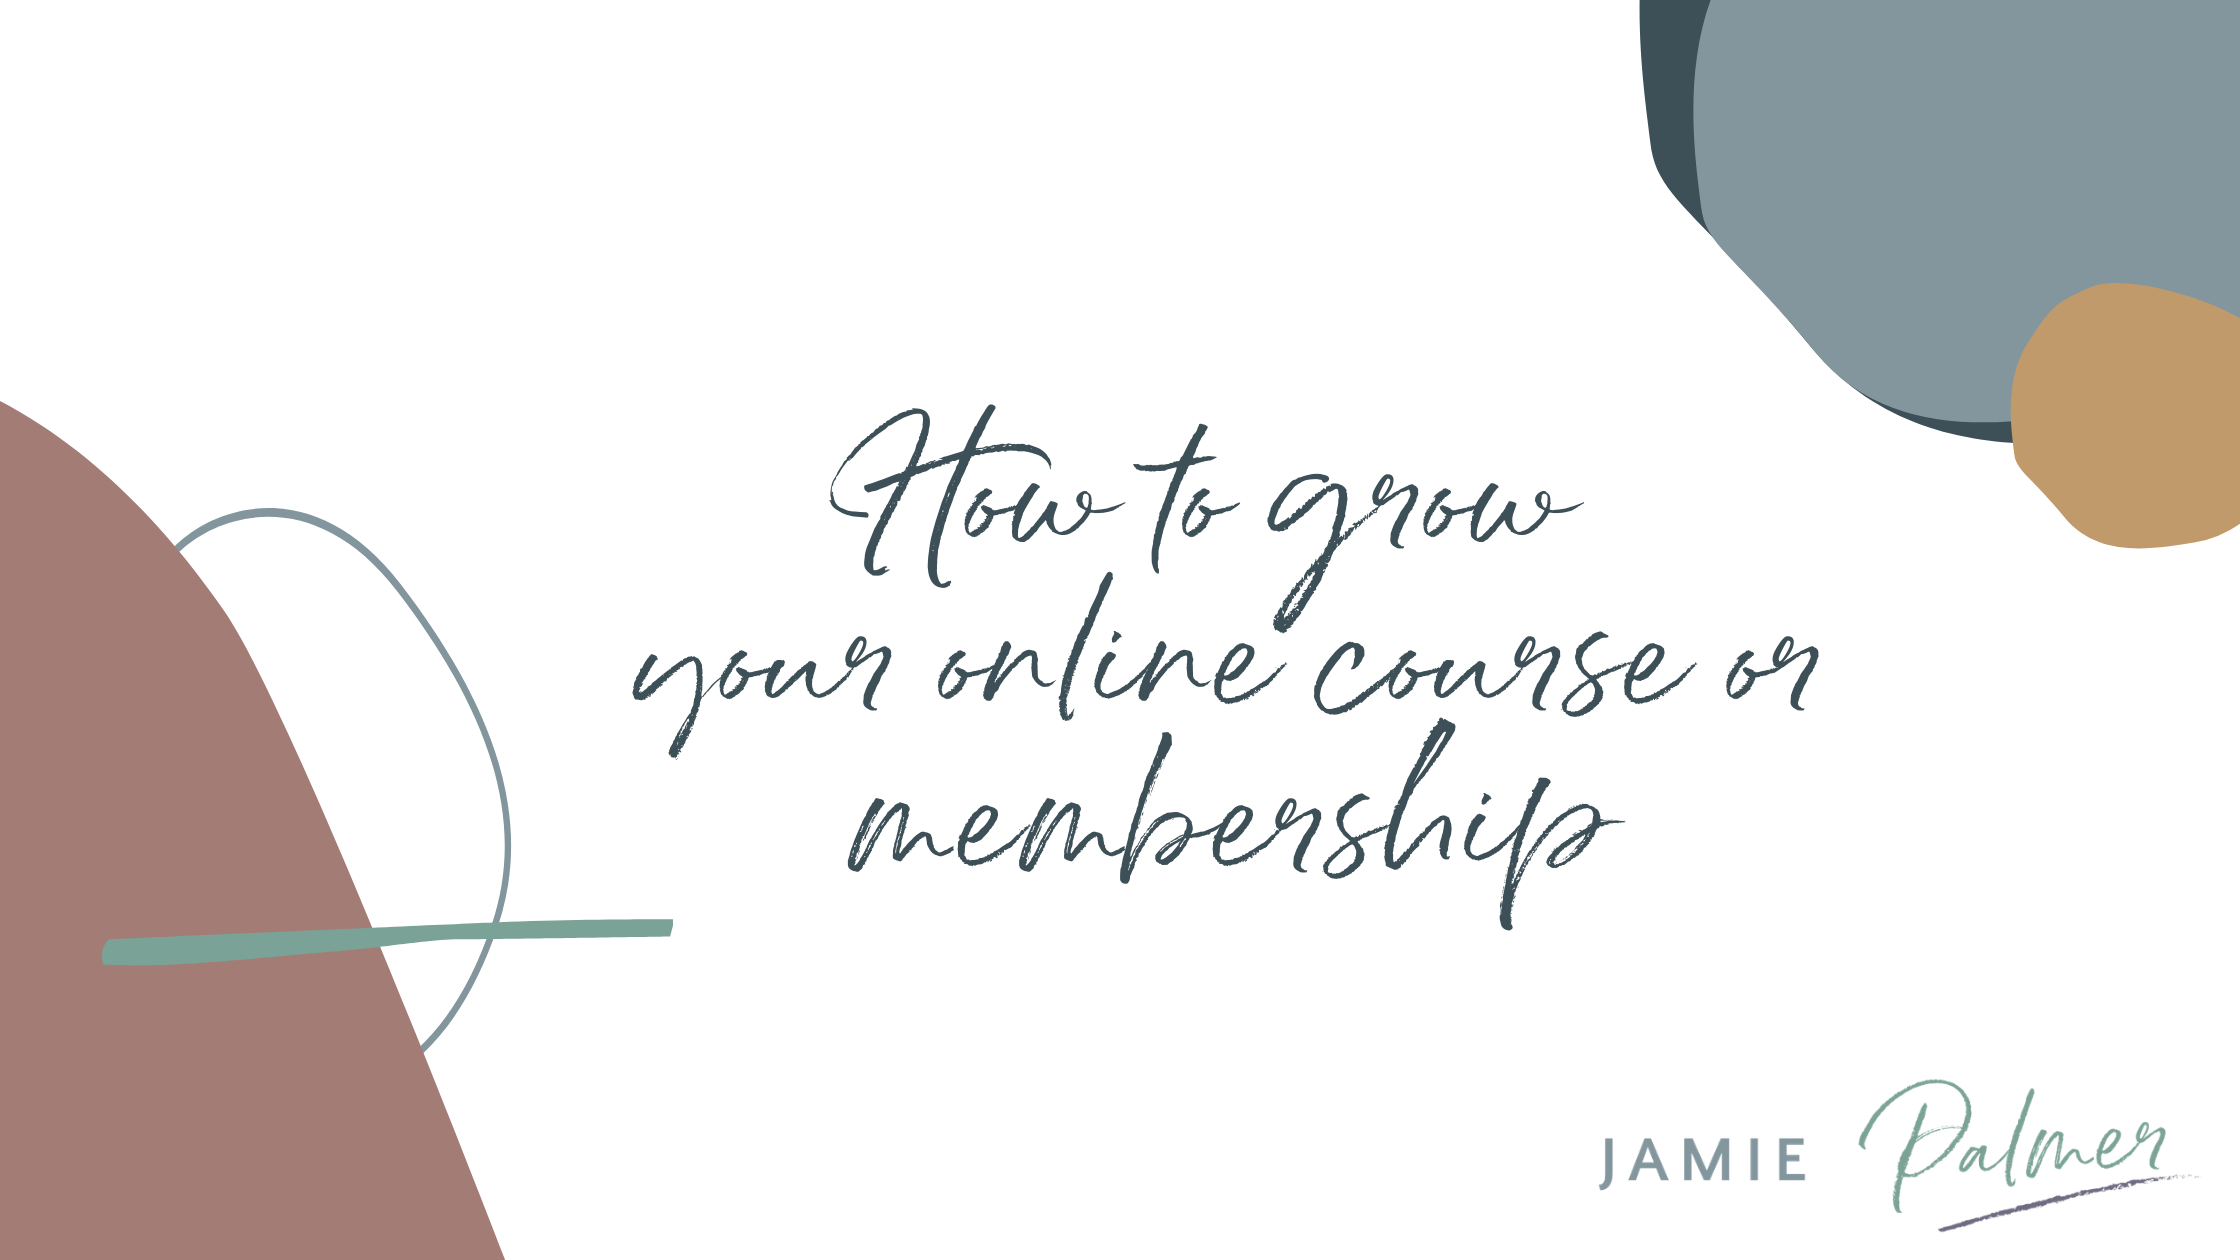 How to Grow your online course or membership blog